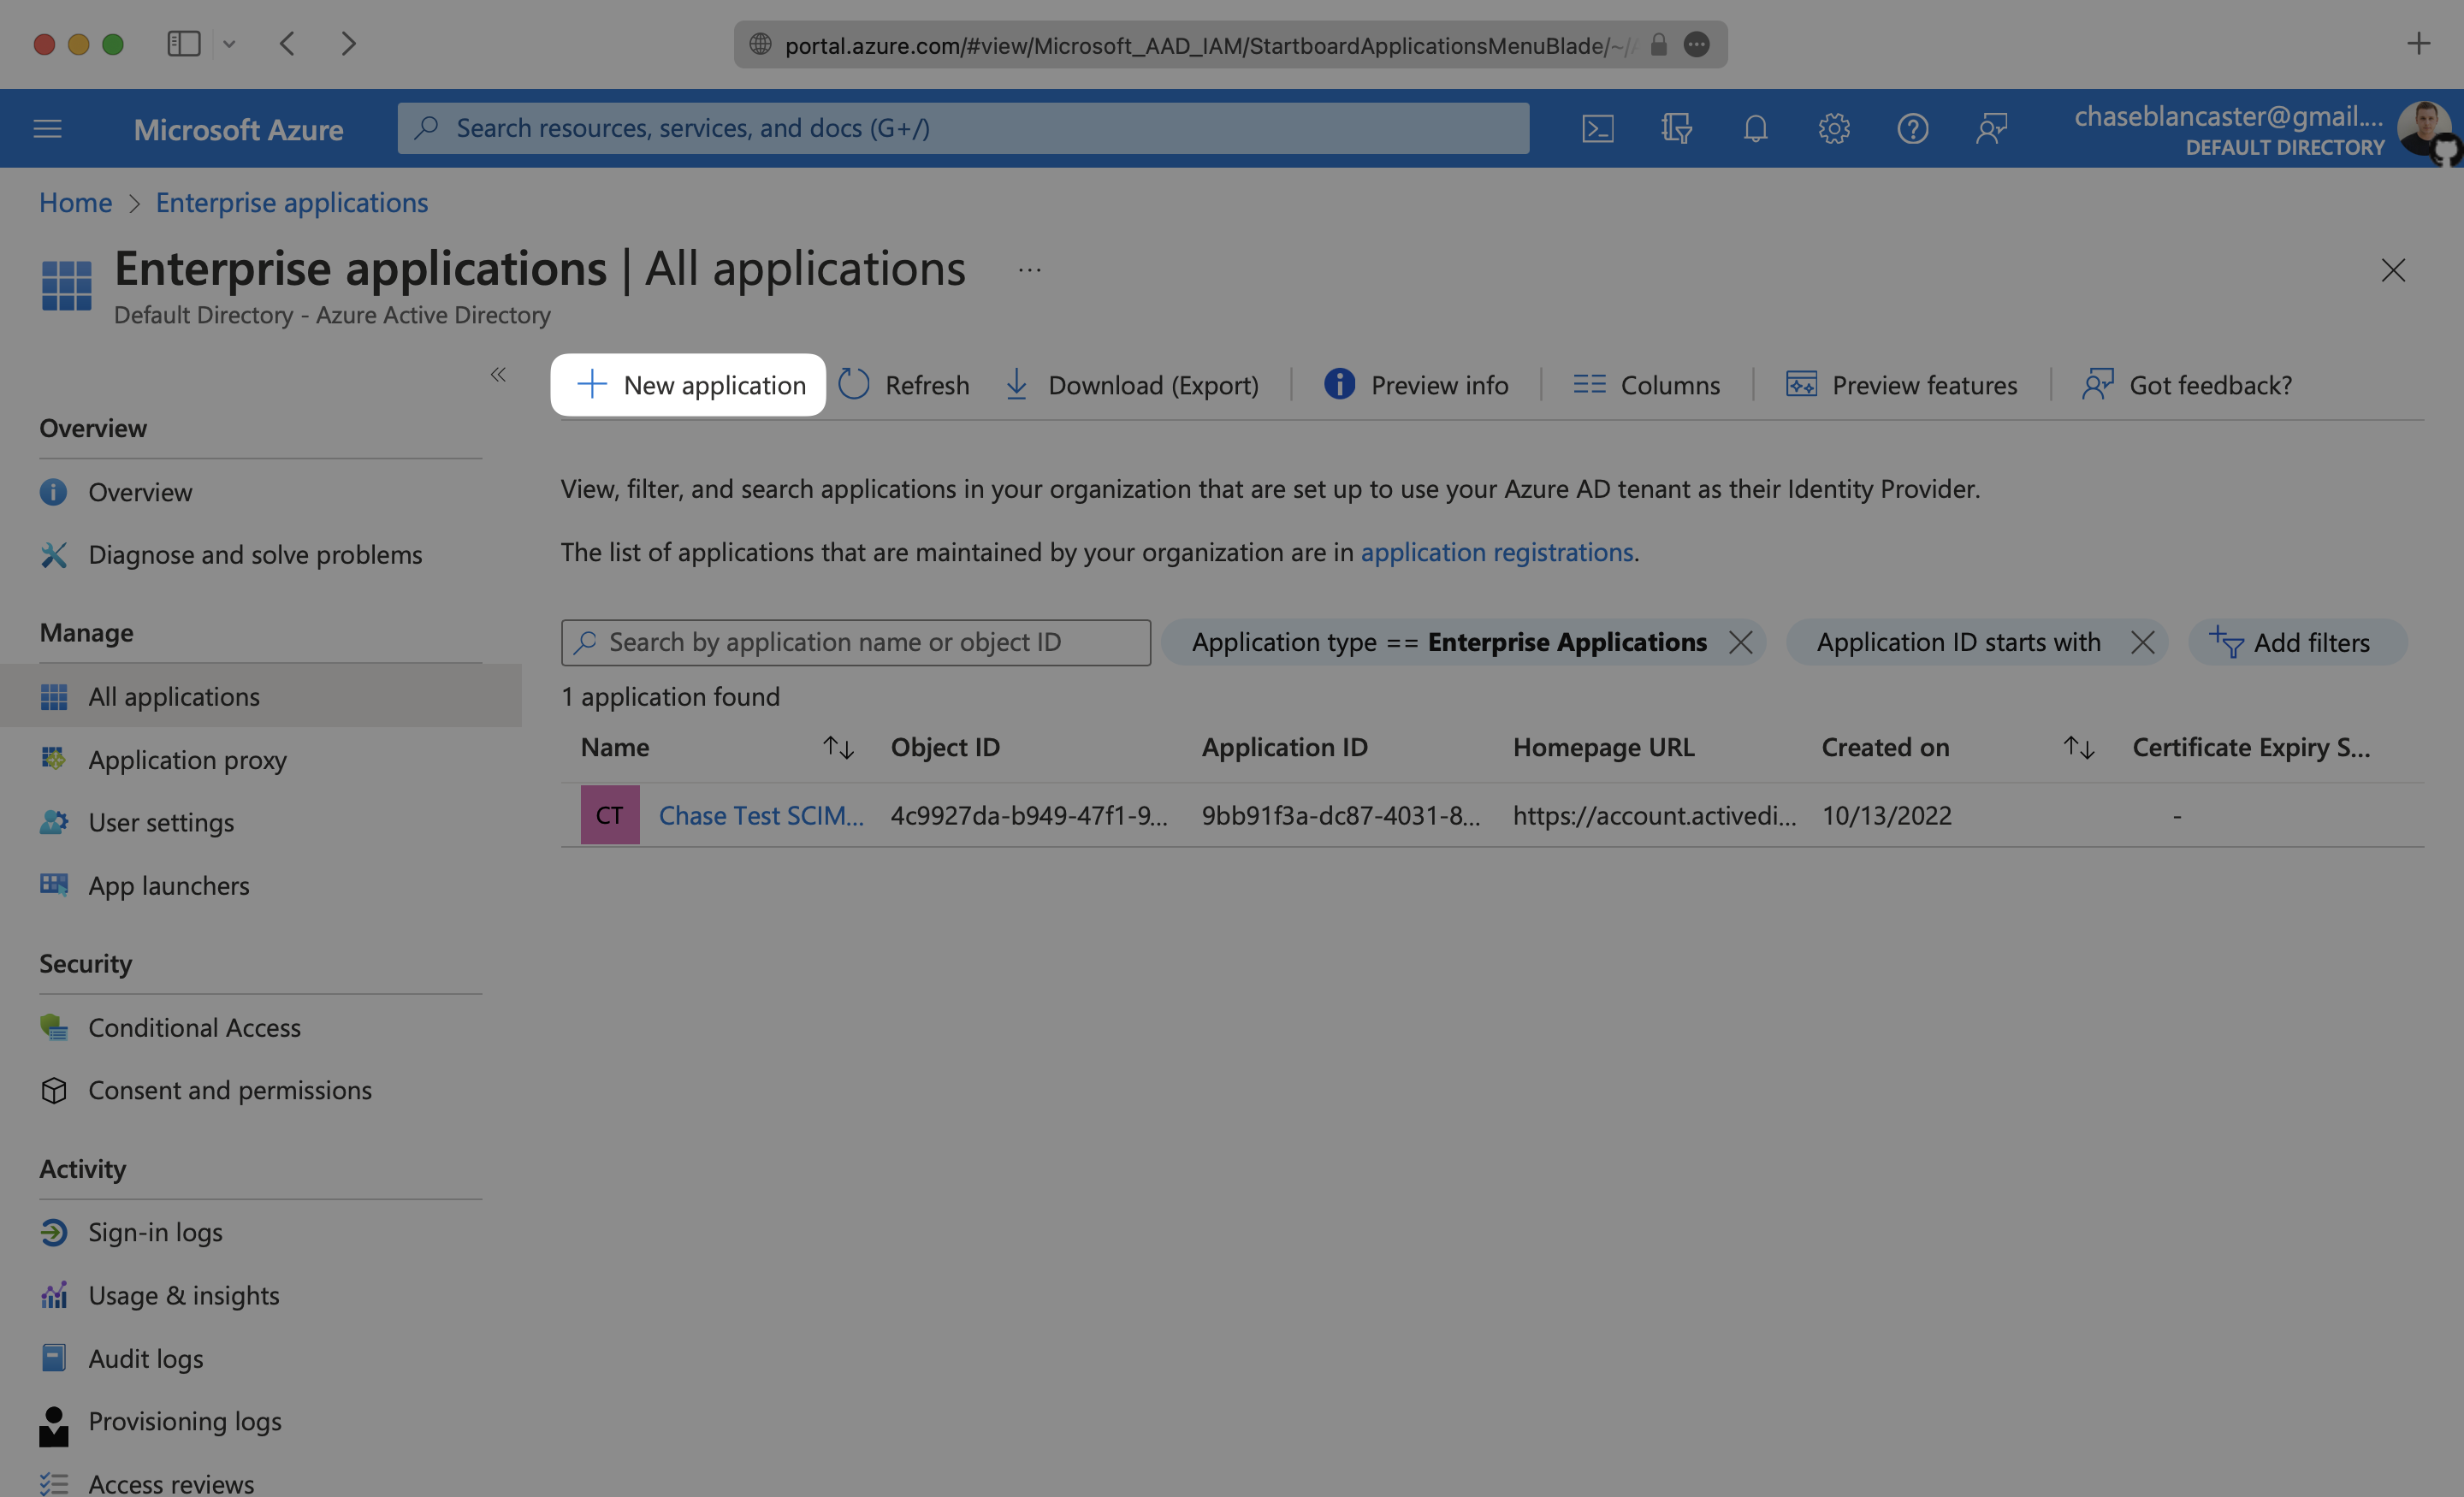 A screenshot showing where to select a new application in the All Applications menu in Azure.